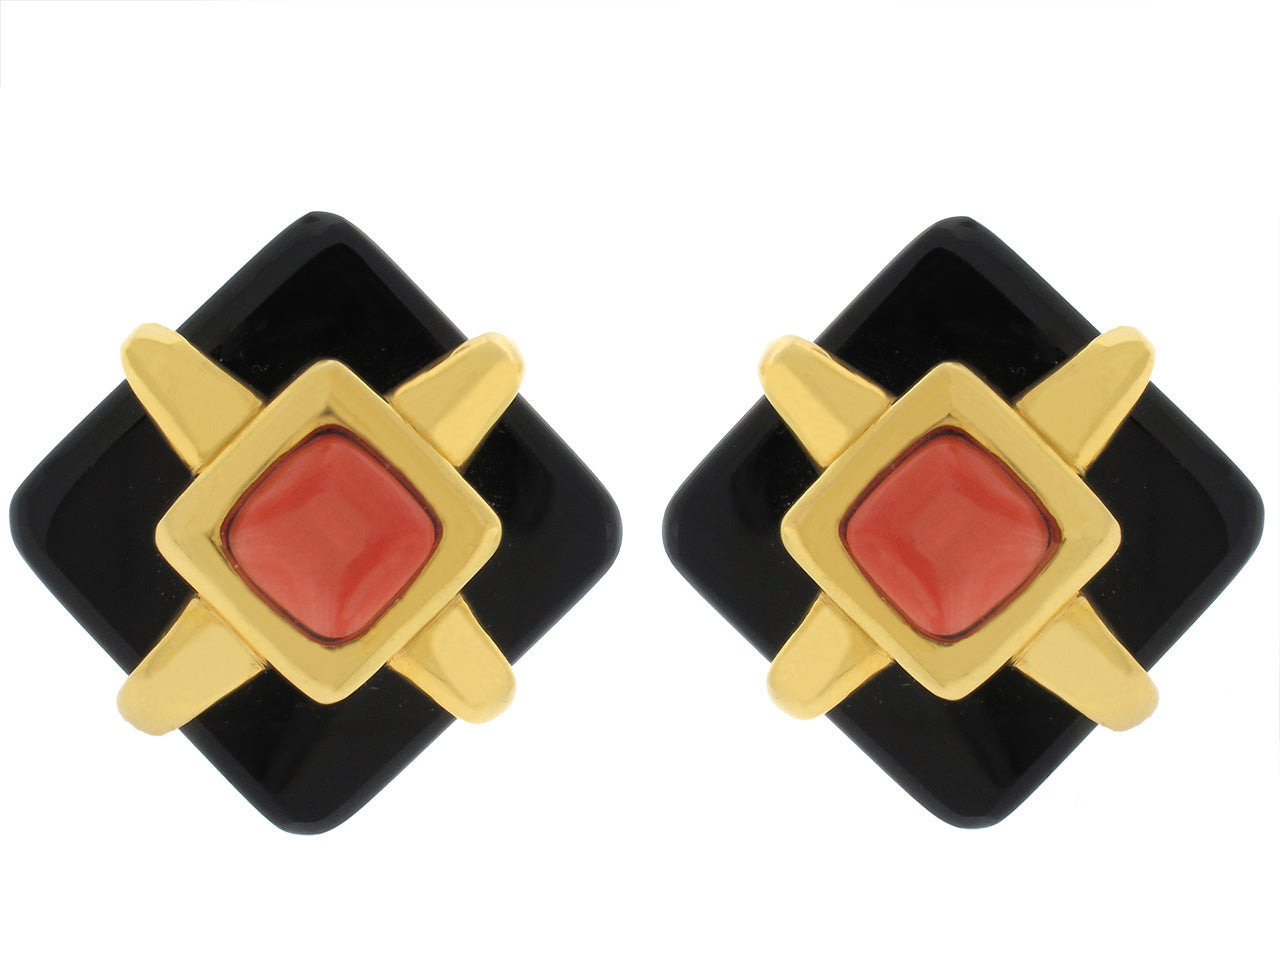 Cartier Aldo Cipullo Onyx and Coral Earrings in 18K